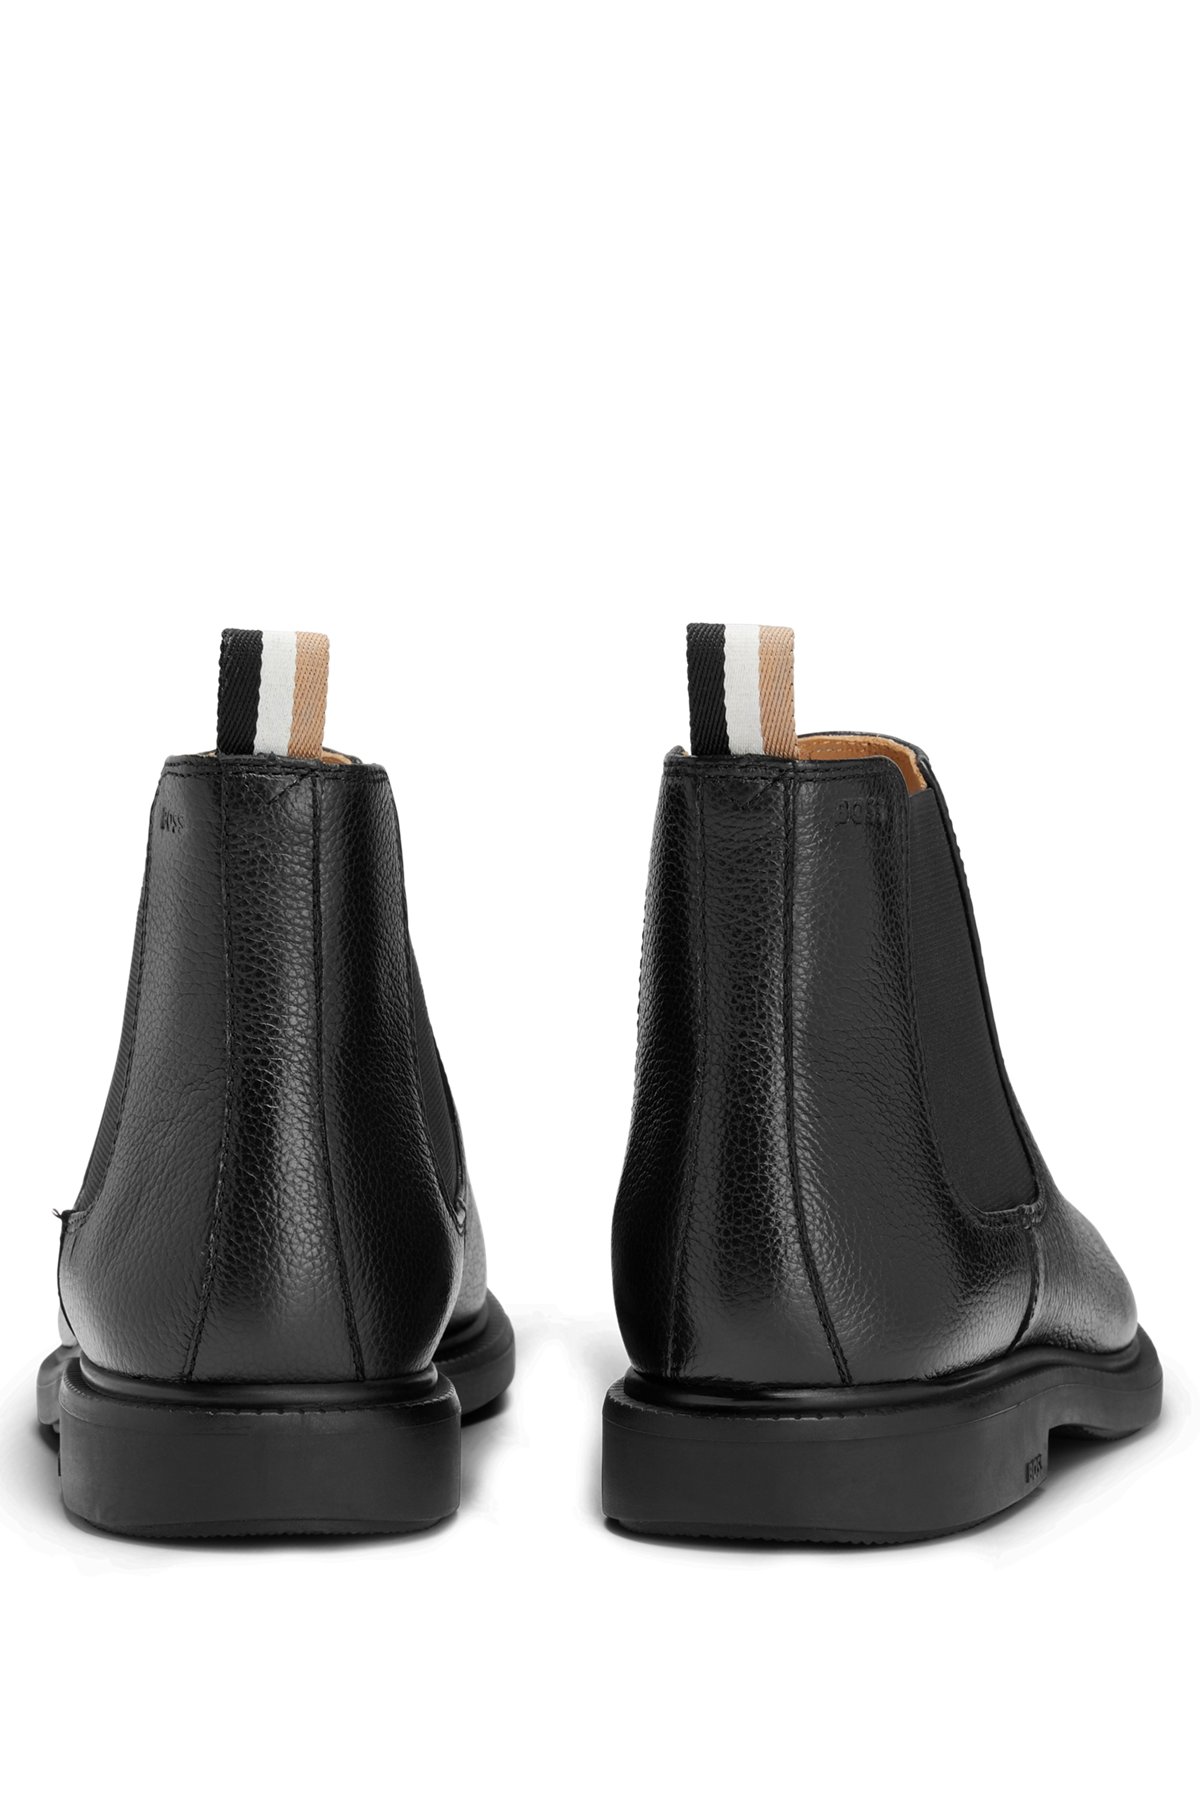 Grained-leather Chelsea boots with logo-trimmed sole, Black